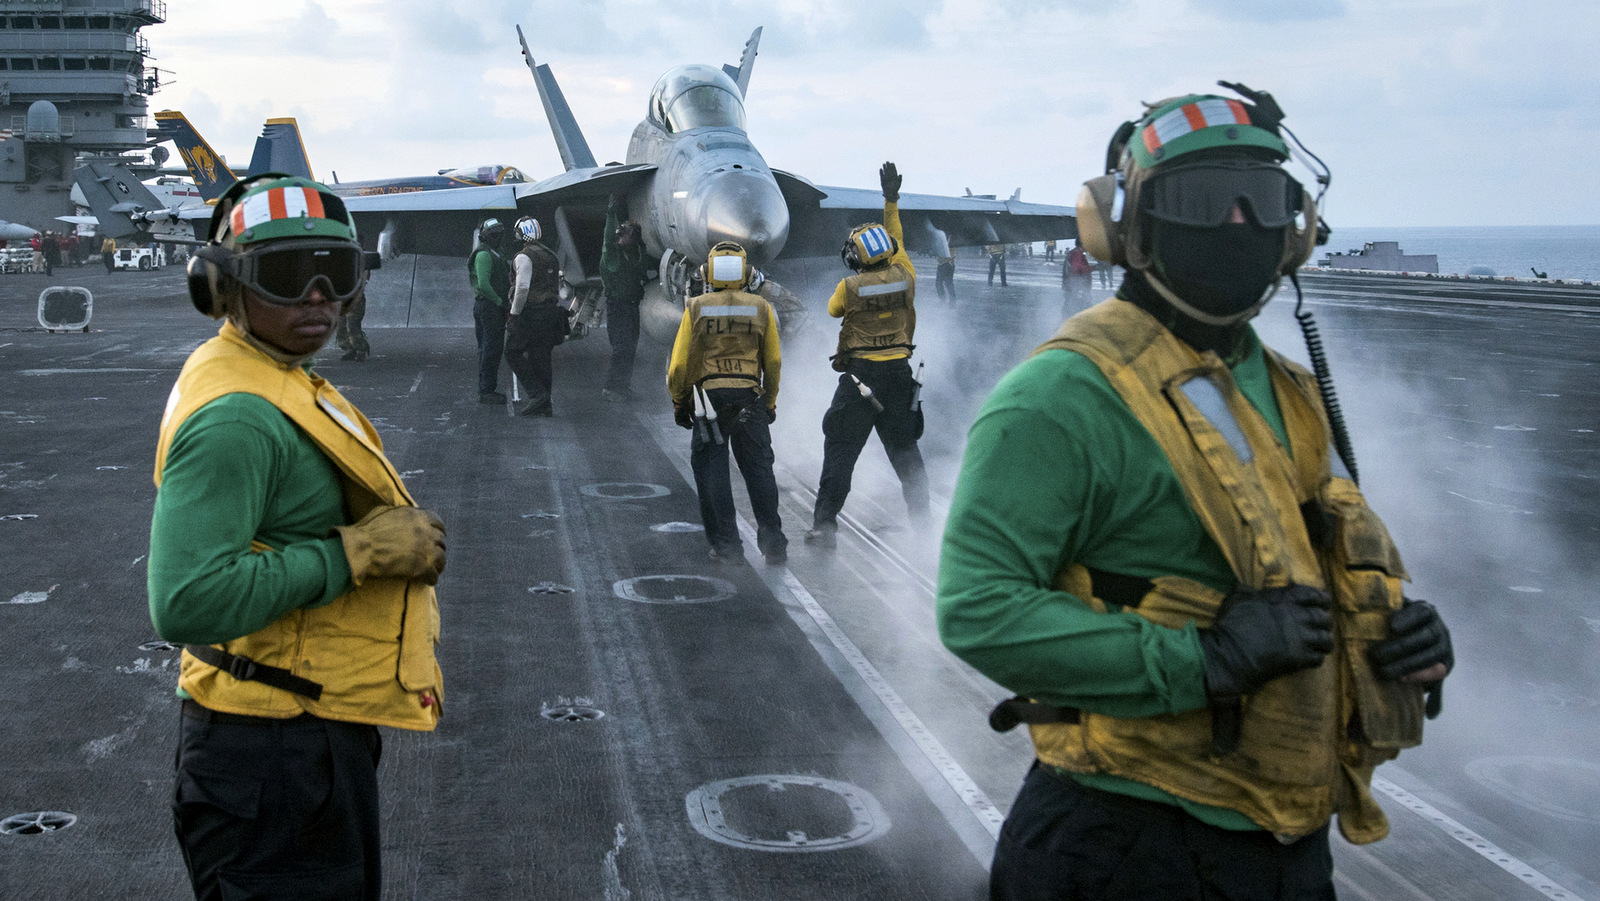 Sailors conduct flight operations on the aircraft carrier USS Carl Vinson (CVN 70) flight deck on April 8, 2017. The Trump administration deployed an aircraft carrier water near North Korea this week in an apparent show of force. (U.S. Navy via AP)